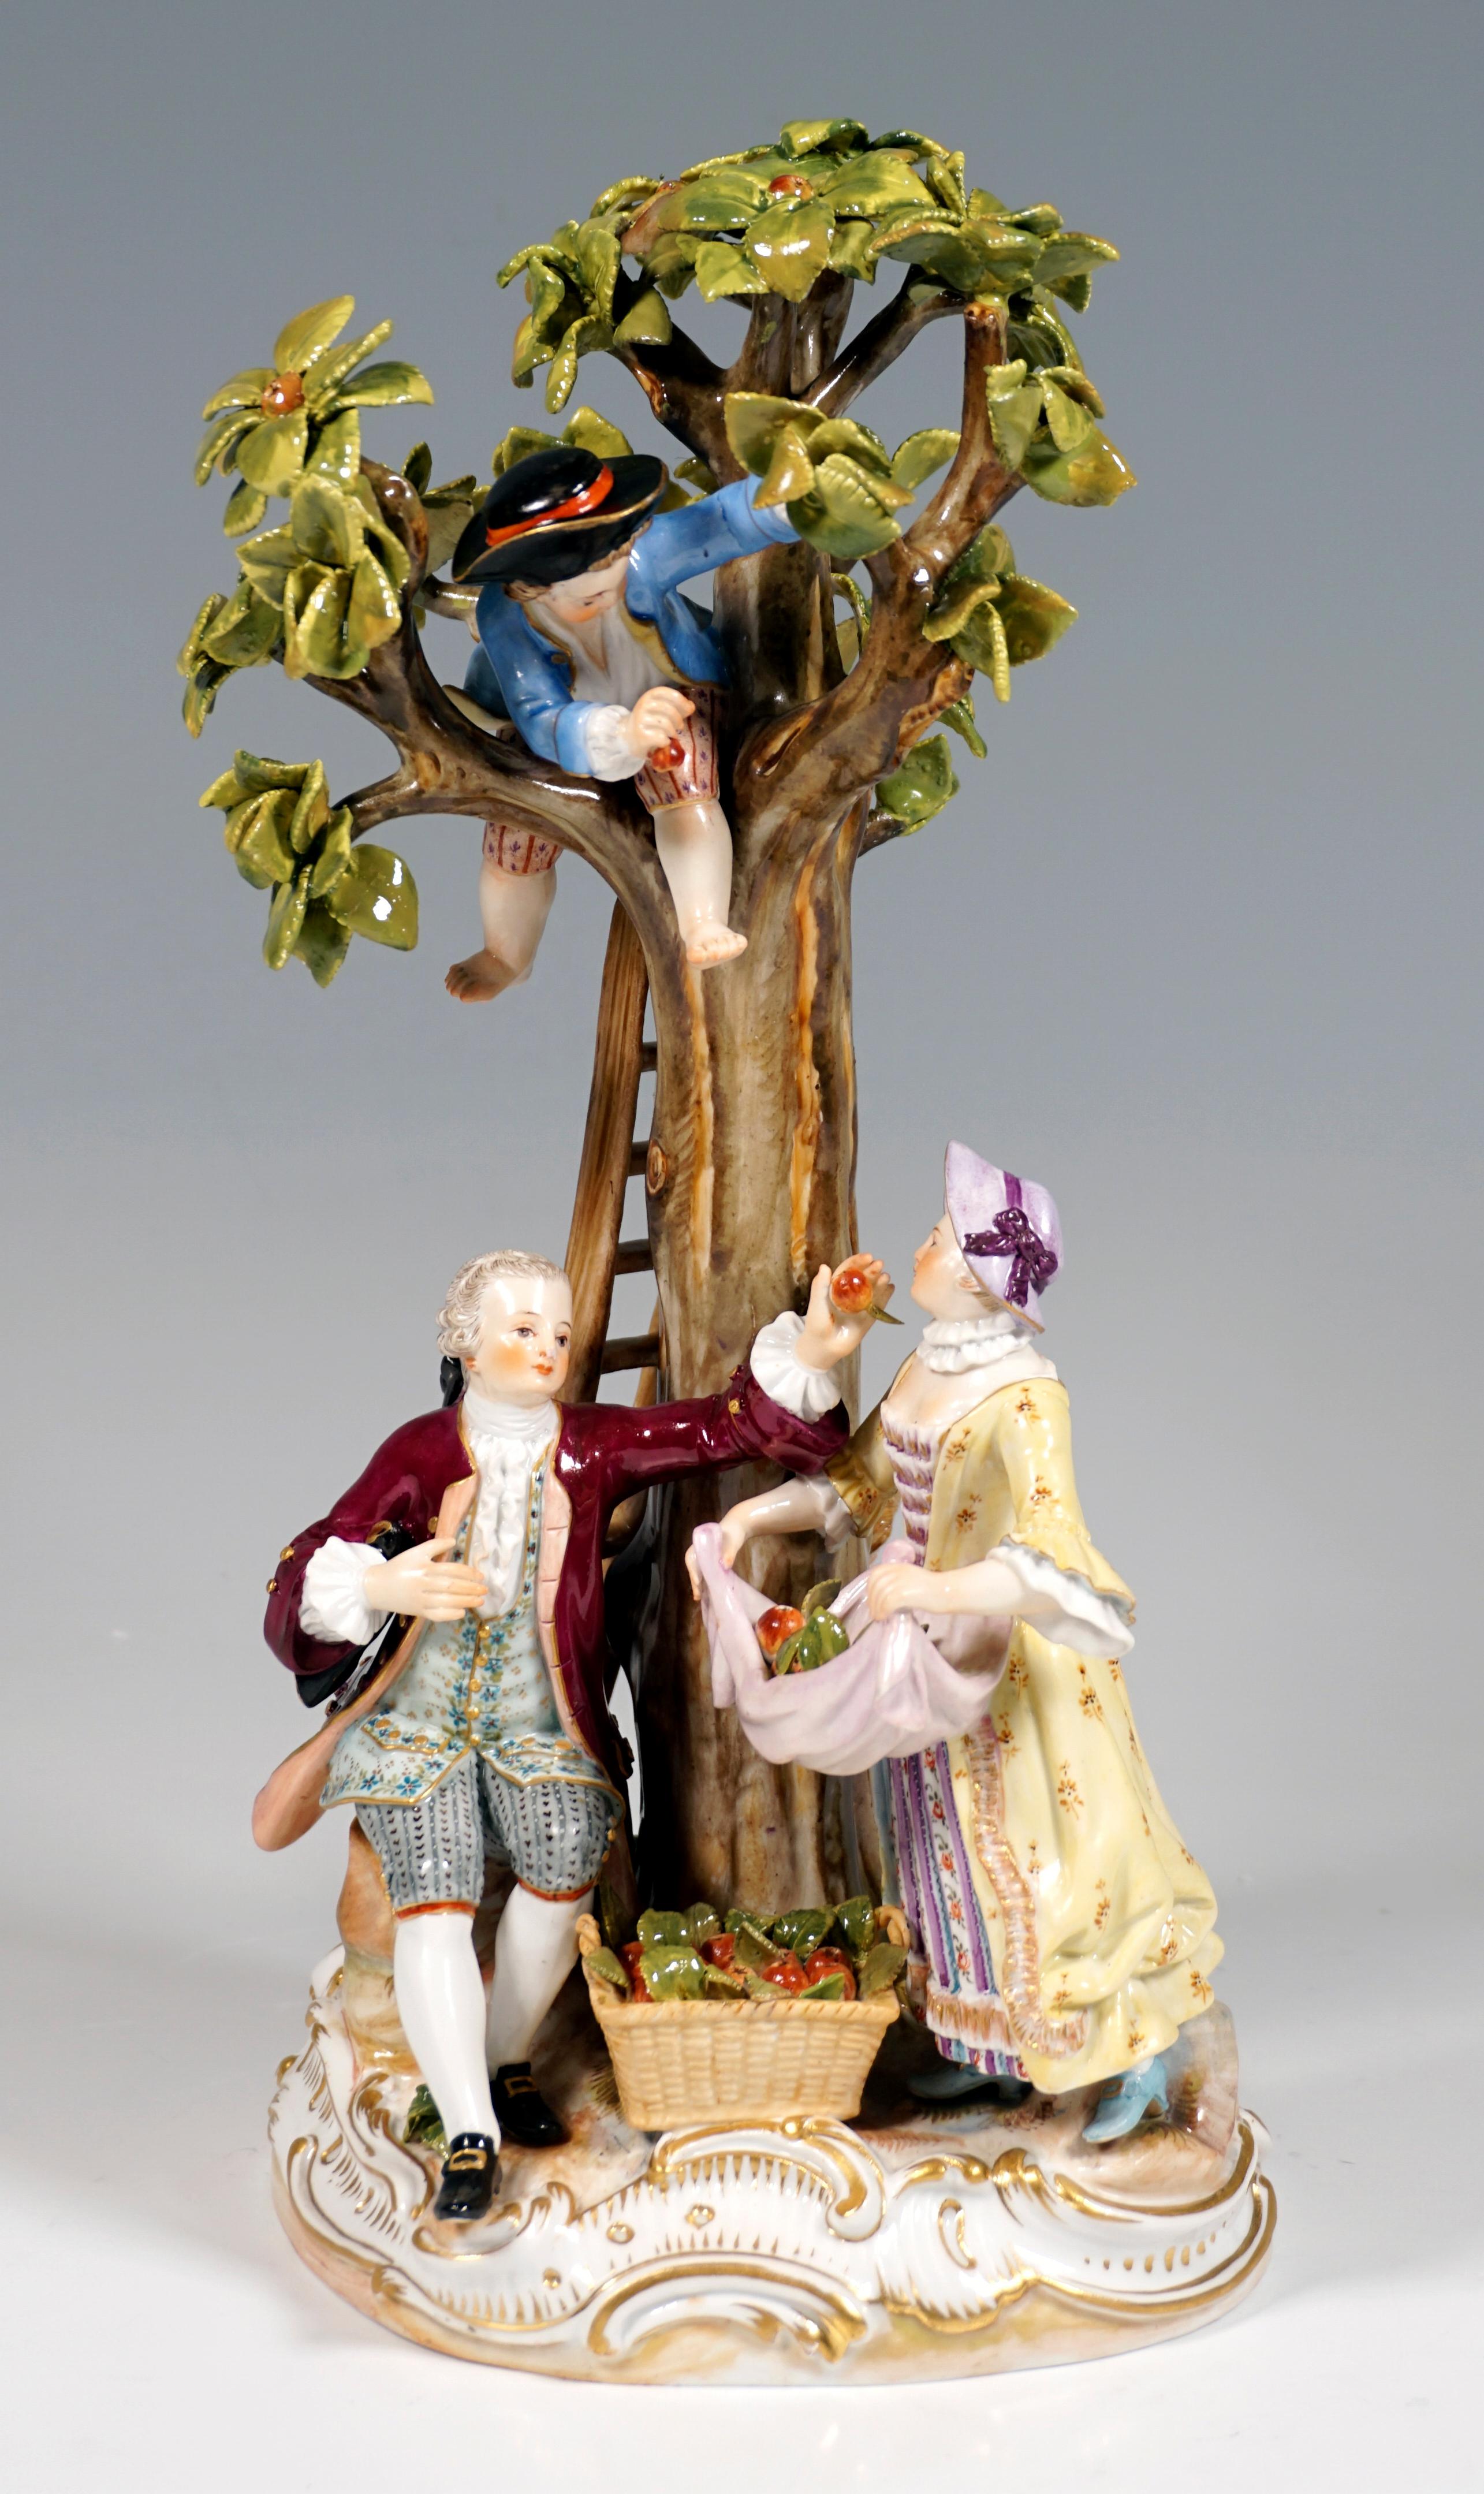 Elaborately crafted porcelain group from the 19th century:
A couple of gardeners and two boys harvesting apples, dressed in rural Rococo robes with fine decorations, a boy standing at the top end of the ladder leaning against the tree and picking